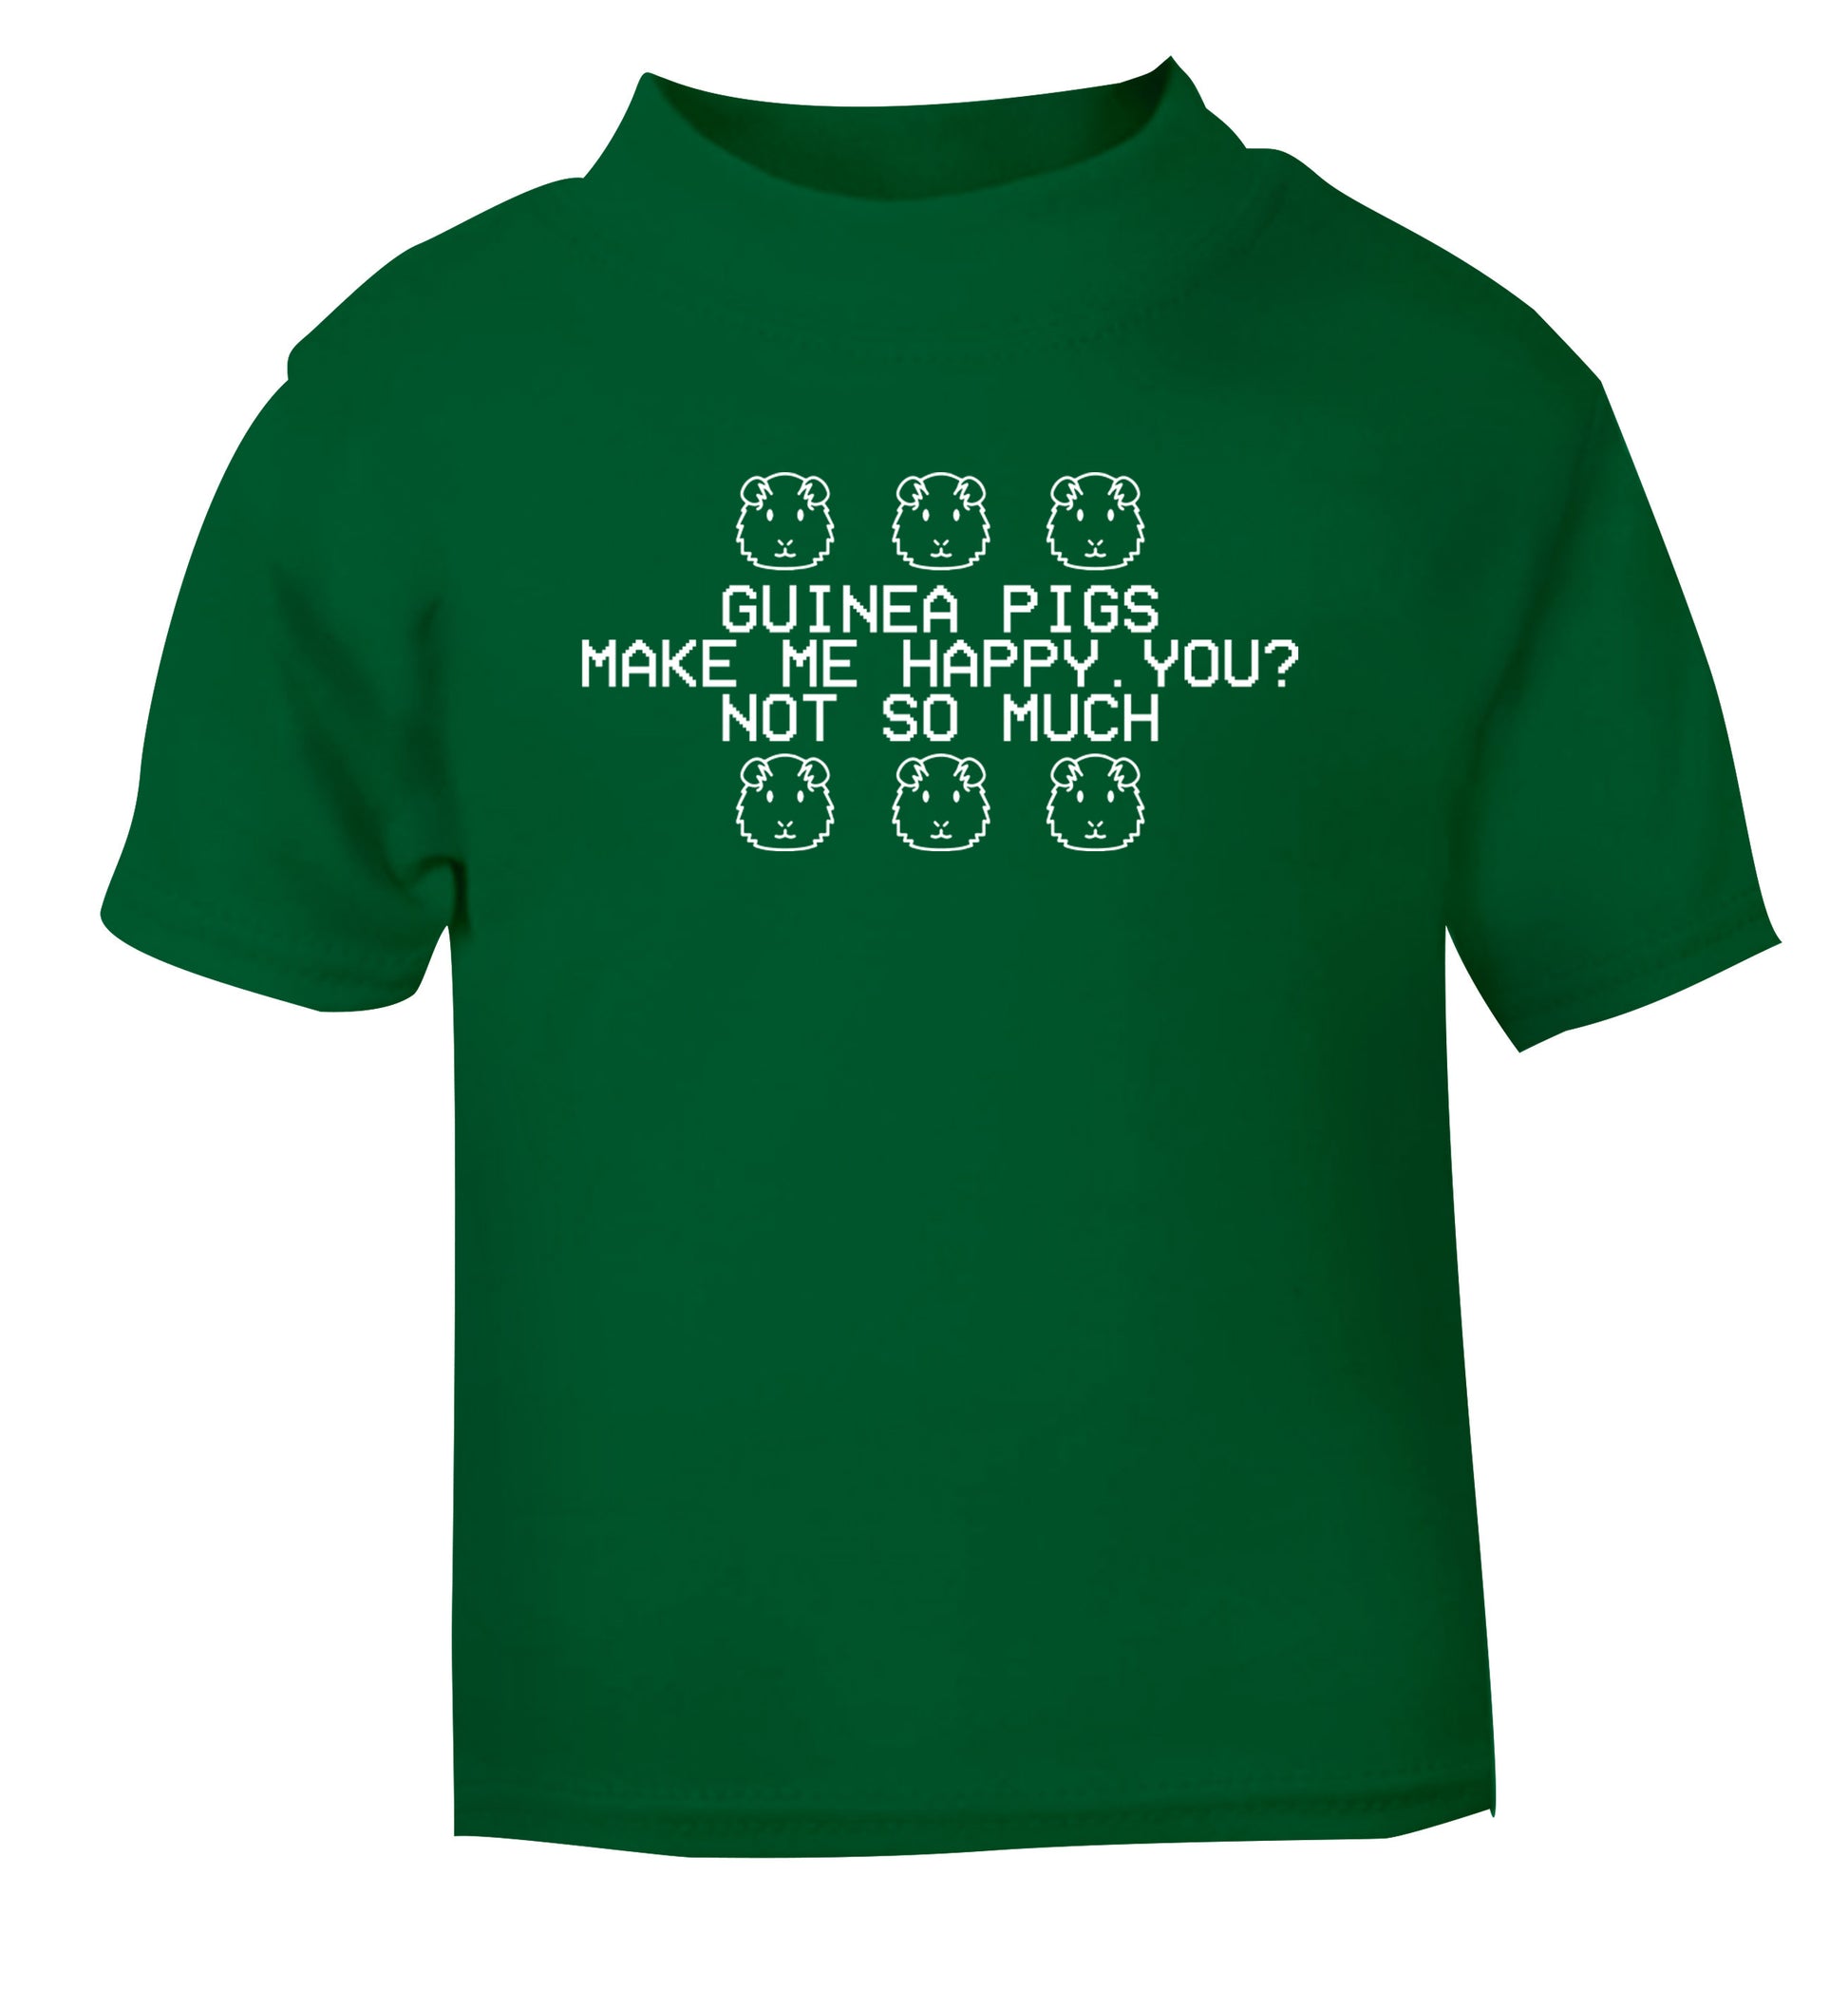 Guinea pigs make me happy, you not so much green Baby Toddler Tshirt 2 Years